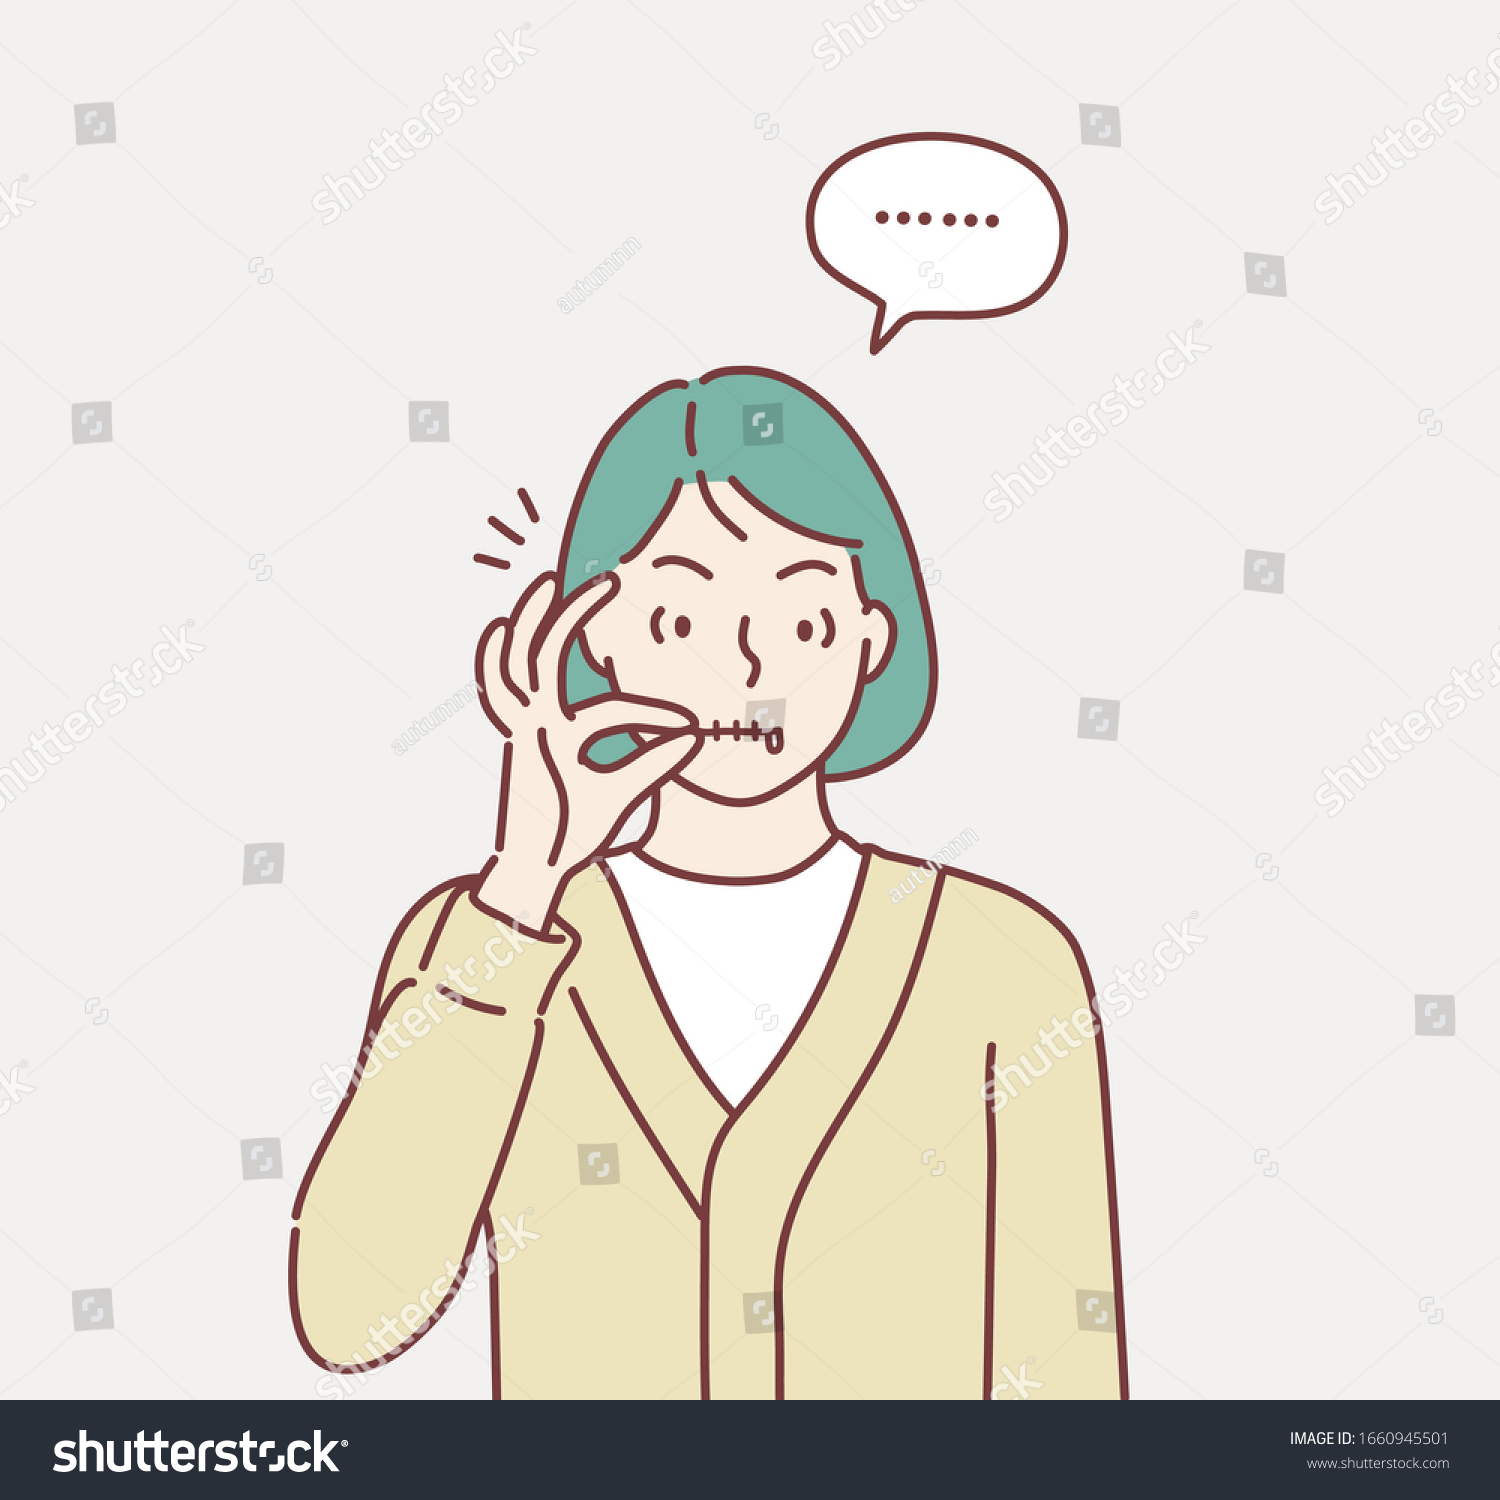 SVG of Zipping her mouth, abstract background in shut up concept. Hand drawn style vector design illustrations. svg